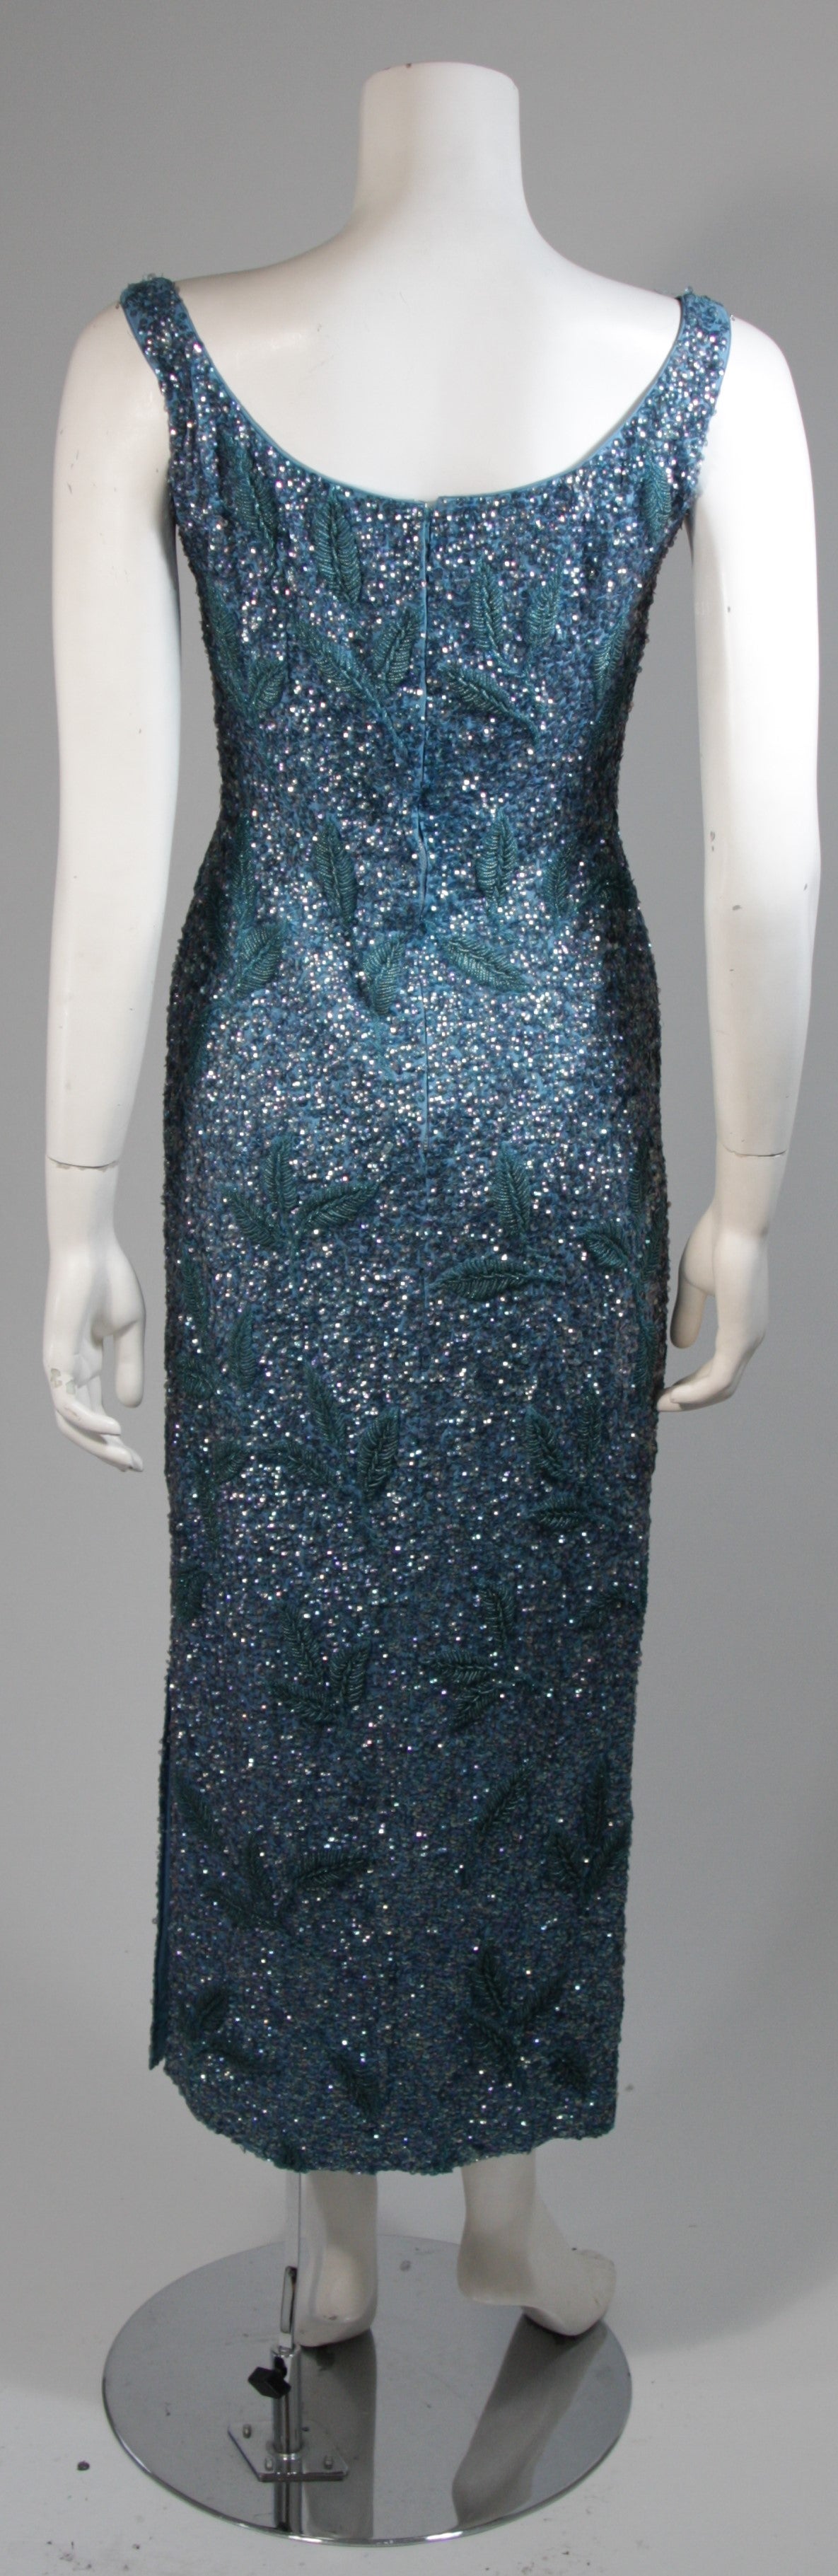 Custom 1960's Sapphire Blue Beaded Gown with Sequins Size Small Medium For Sale 4